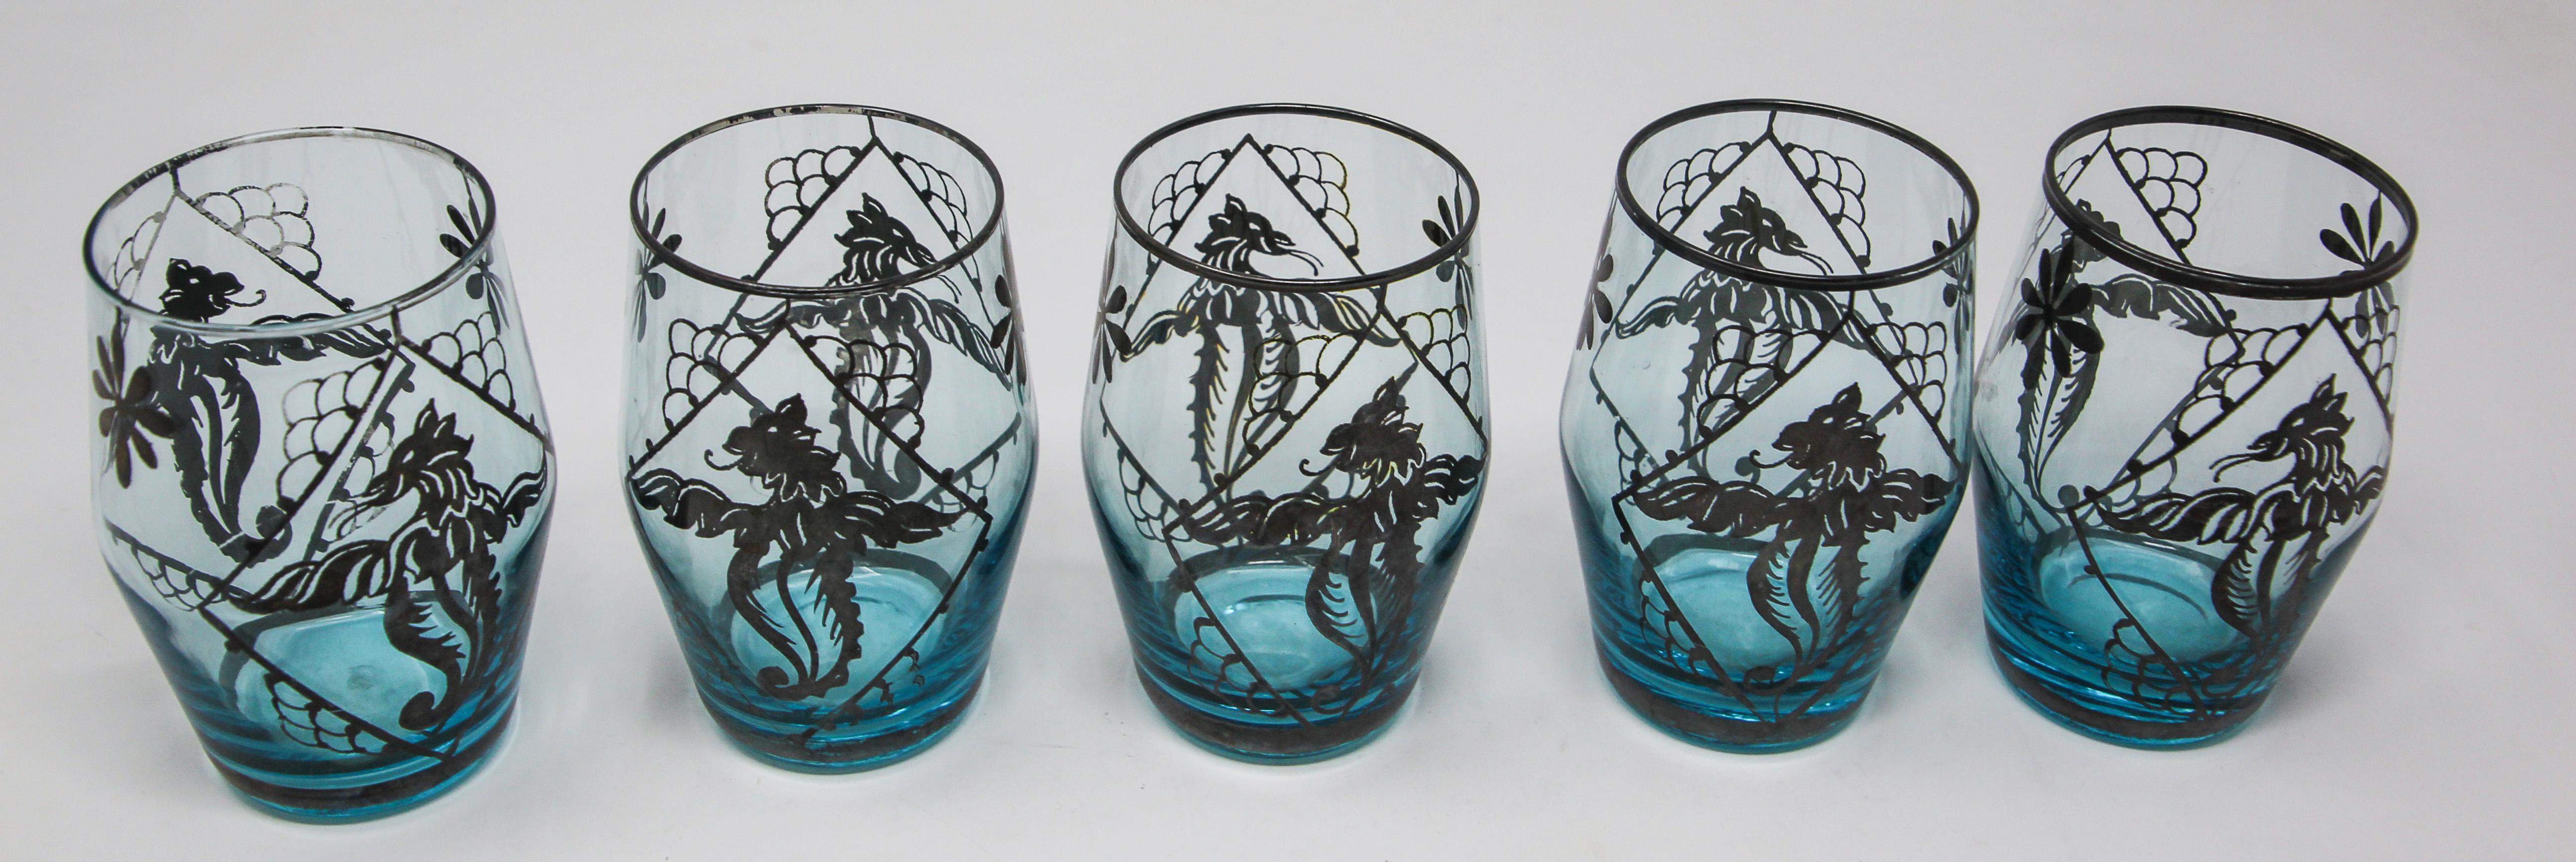 Blue enamelled Bohemian glass liquor set or aperitif service of five glasses.
Five beautiful Bohemia blown glass blue glasses.
Mouth blown glass in a stunning light blue color enhanced with hand painted silver enamel with flying dragons like